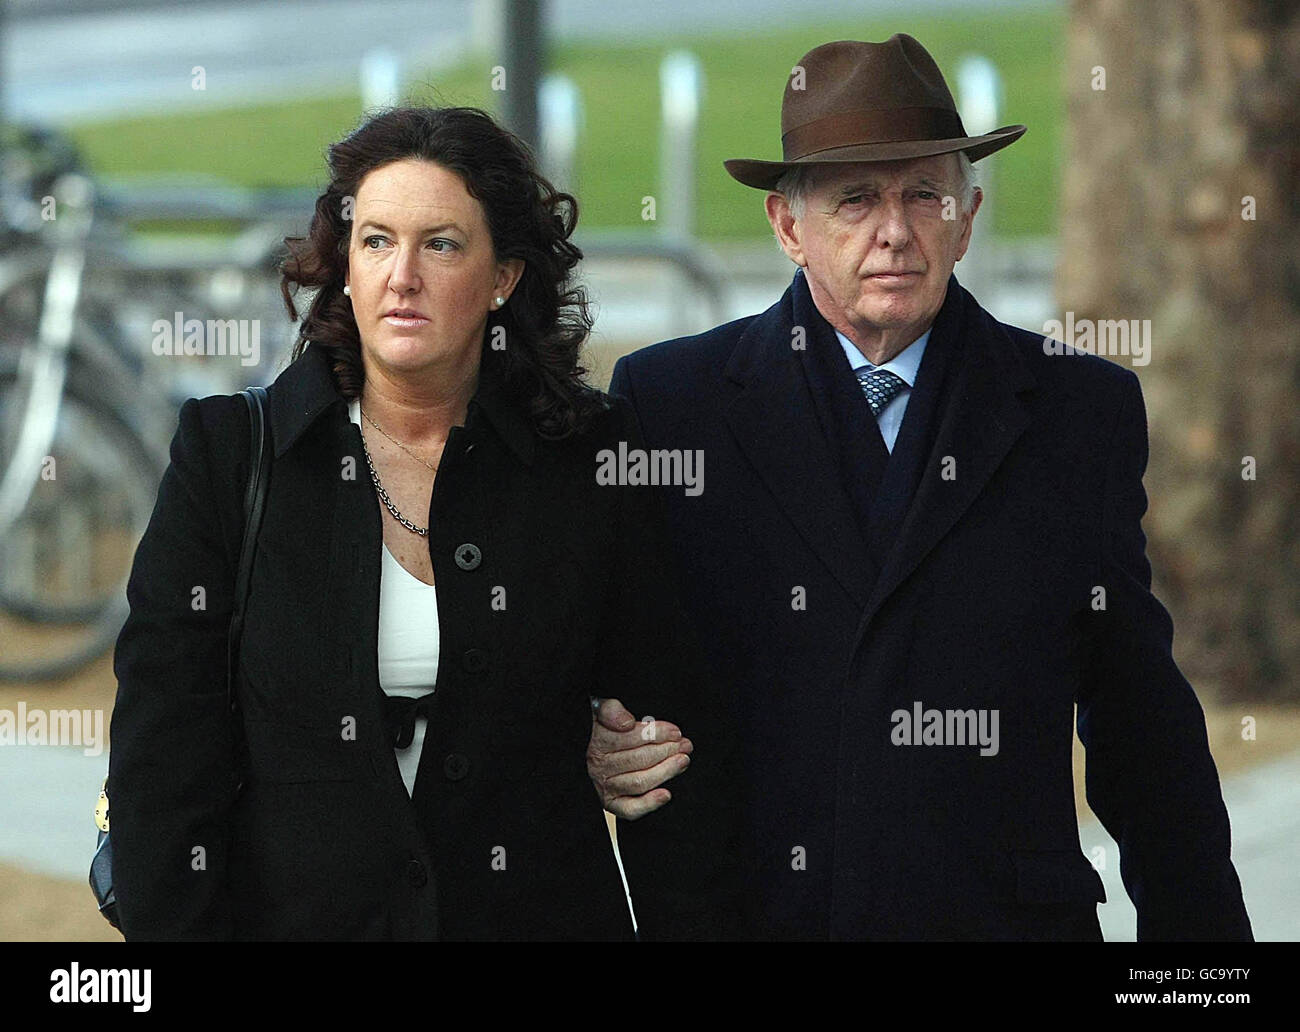 Celine Cawley's sister Susanna Coonan and father James arriving at court today where Eamon Lillis, who is charged with murdering his wife Celine, still waits on the jury who are still deliberating in his case at Criminal Courts of the Justice, Dublin. Stock Photo